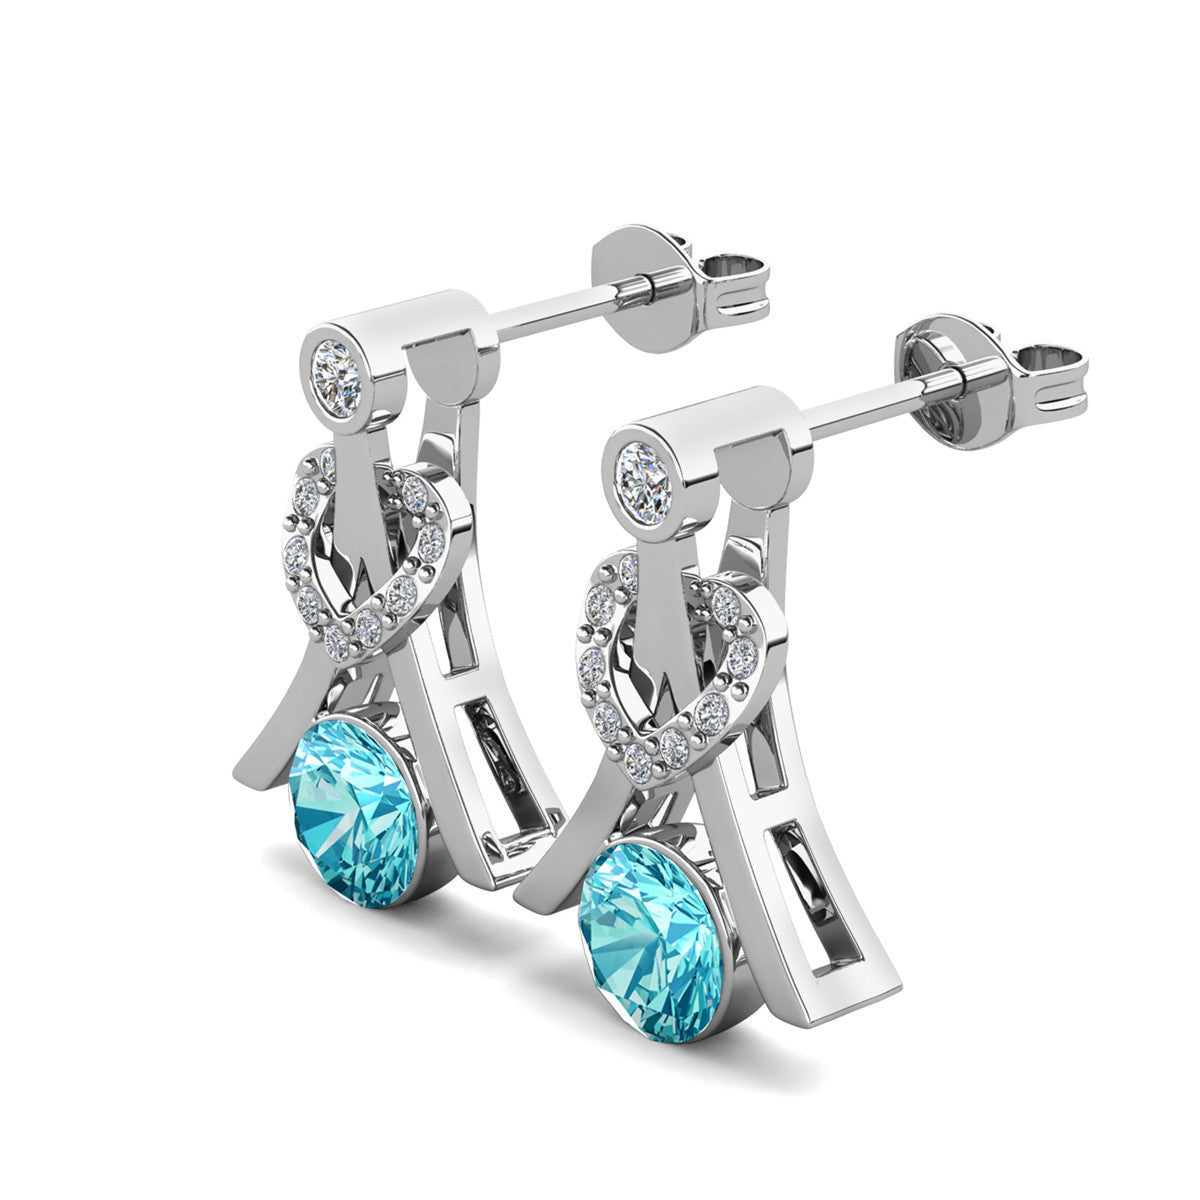 Serenity Birthstone Earrings 18k White Gold Plated with Round Cut Crystals